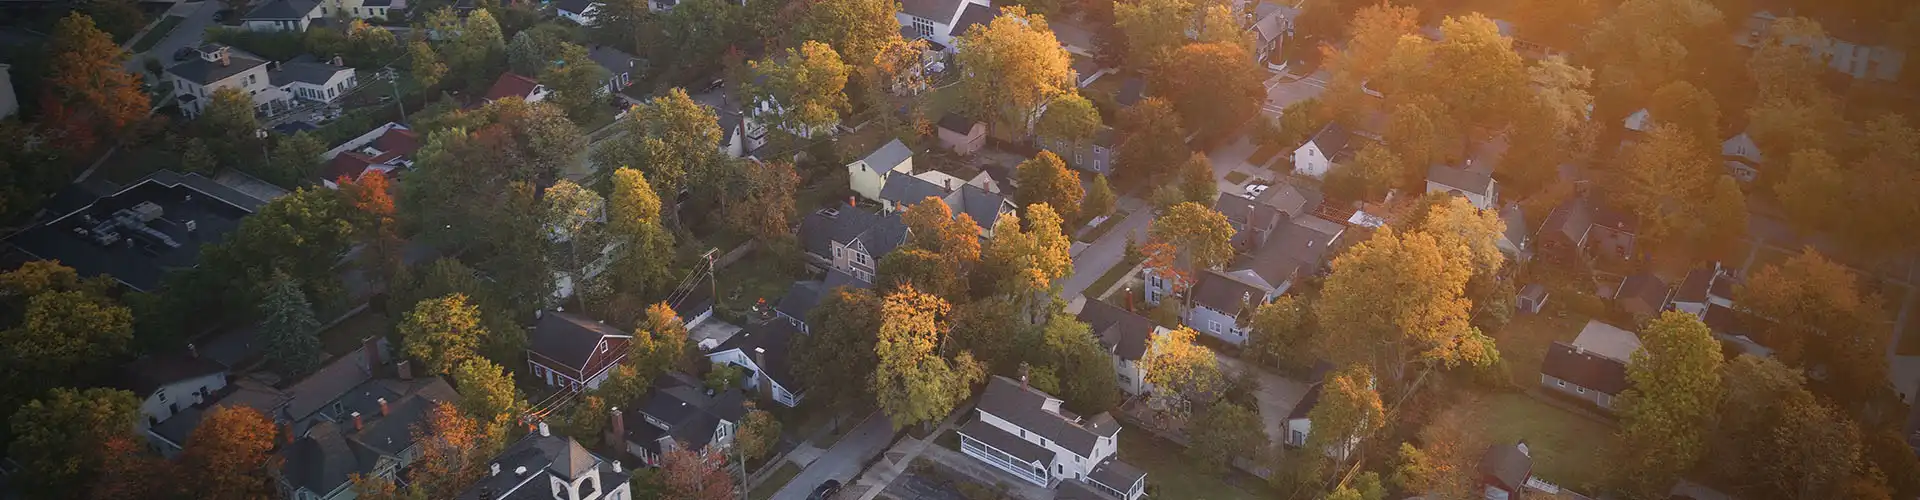 A bird's eye view of Pottstown, Pennsylvania with the sun shining during a sunrise.